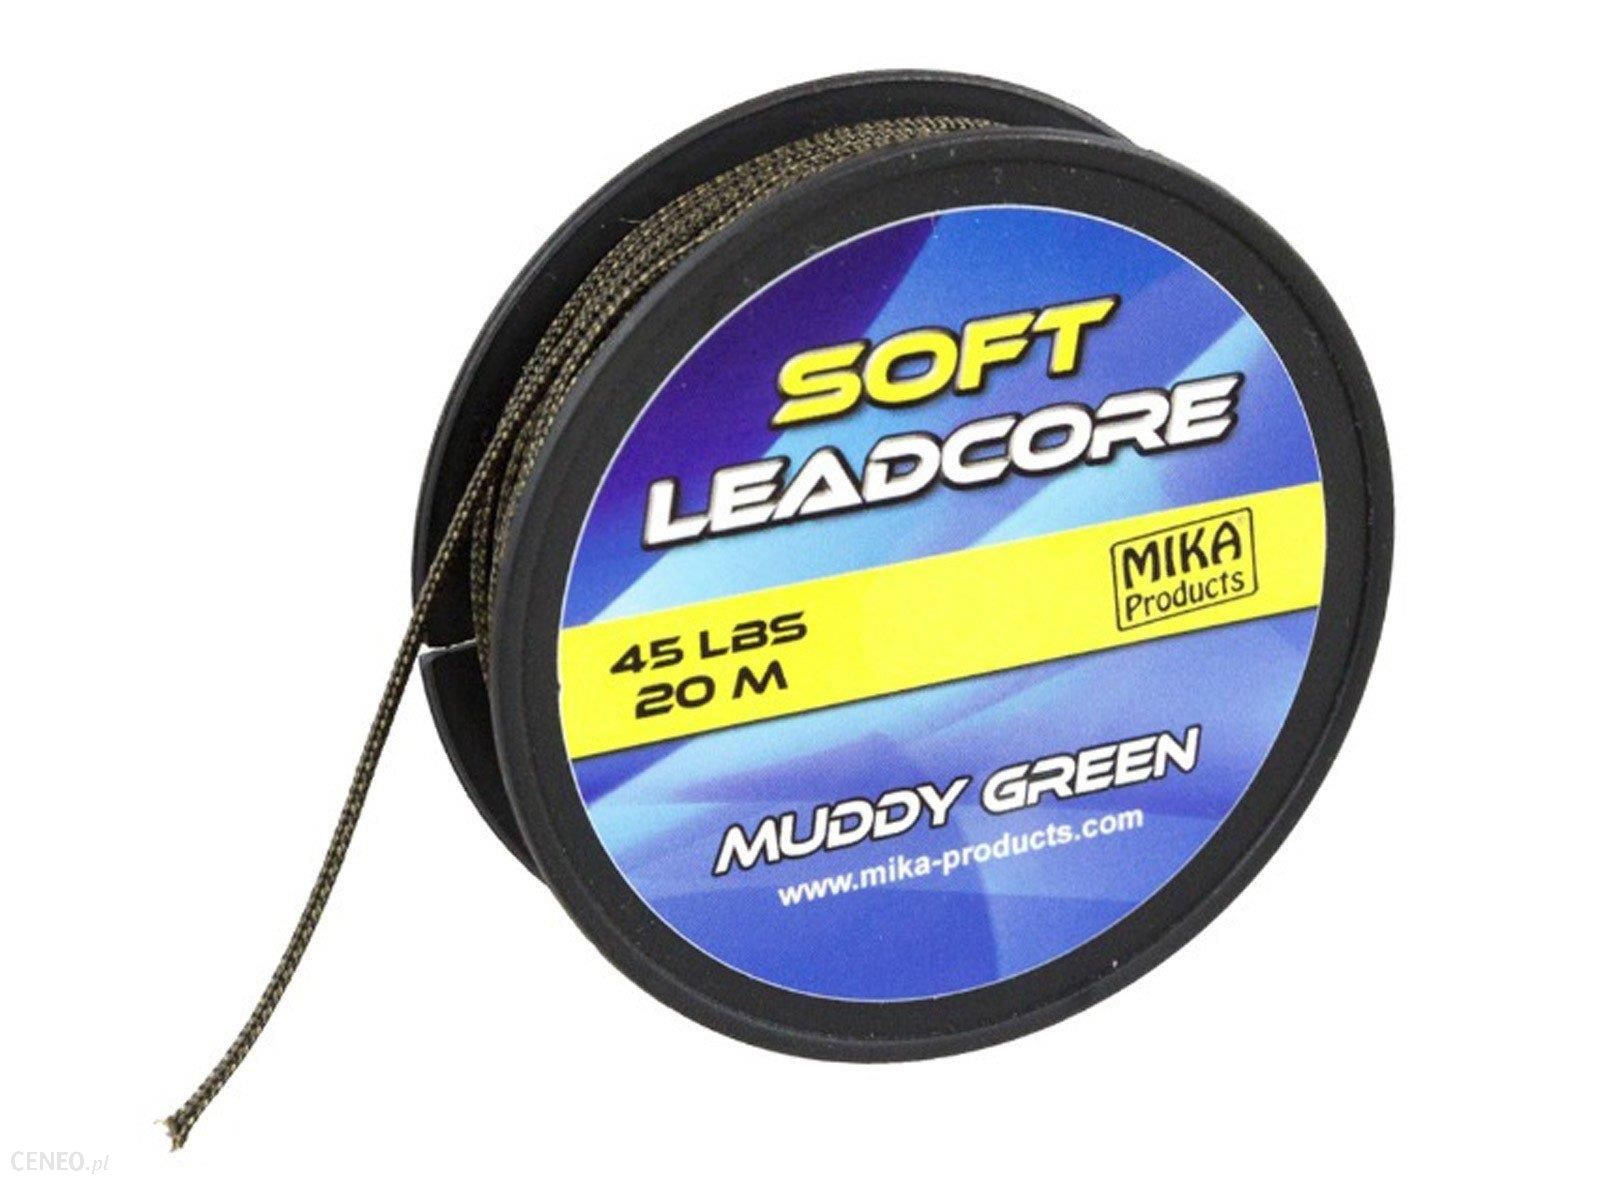 Mika Products Leadcore Soft 45 Lbs 20M